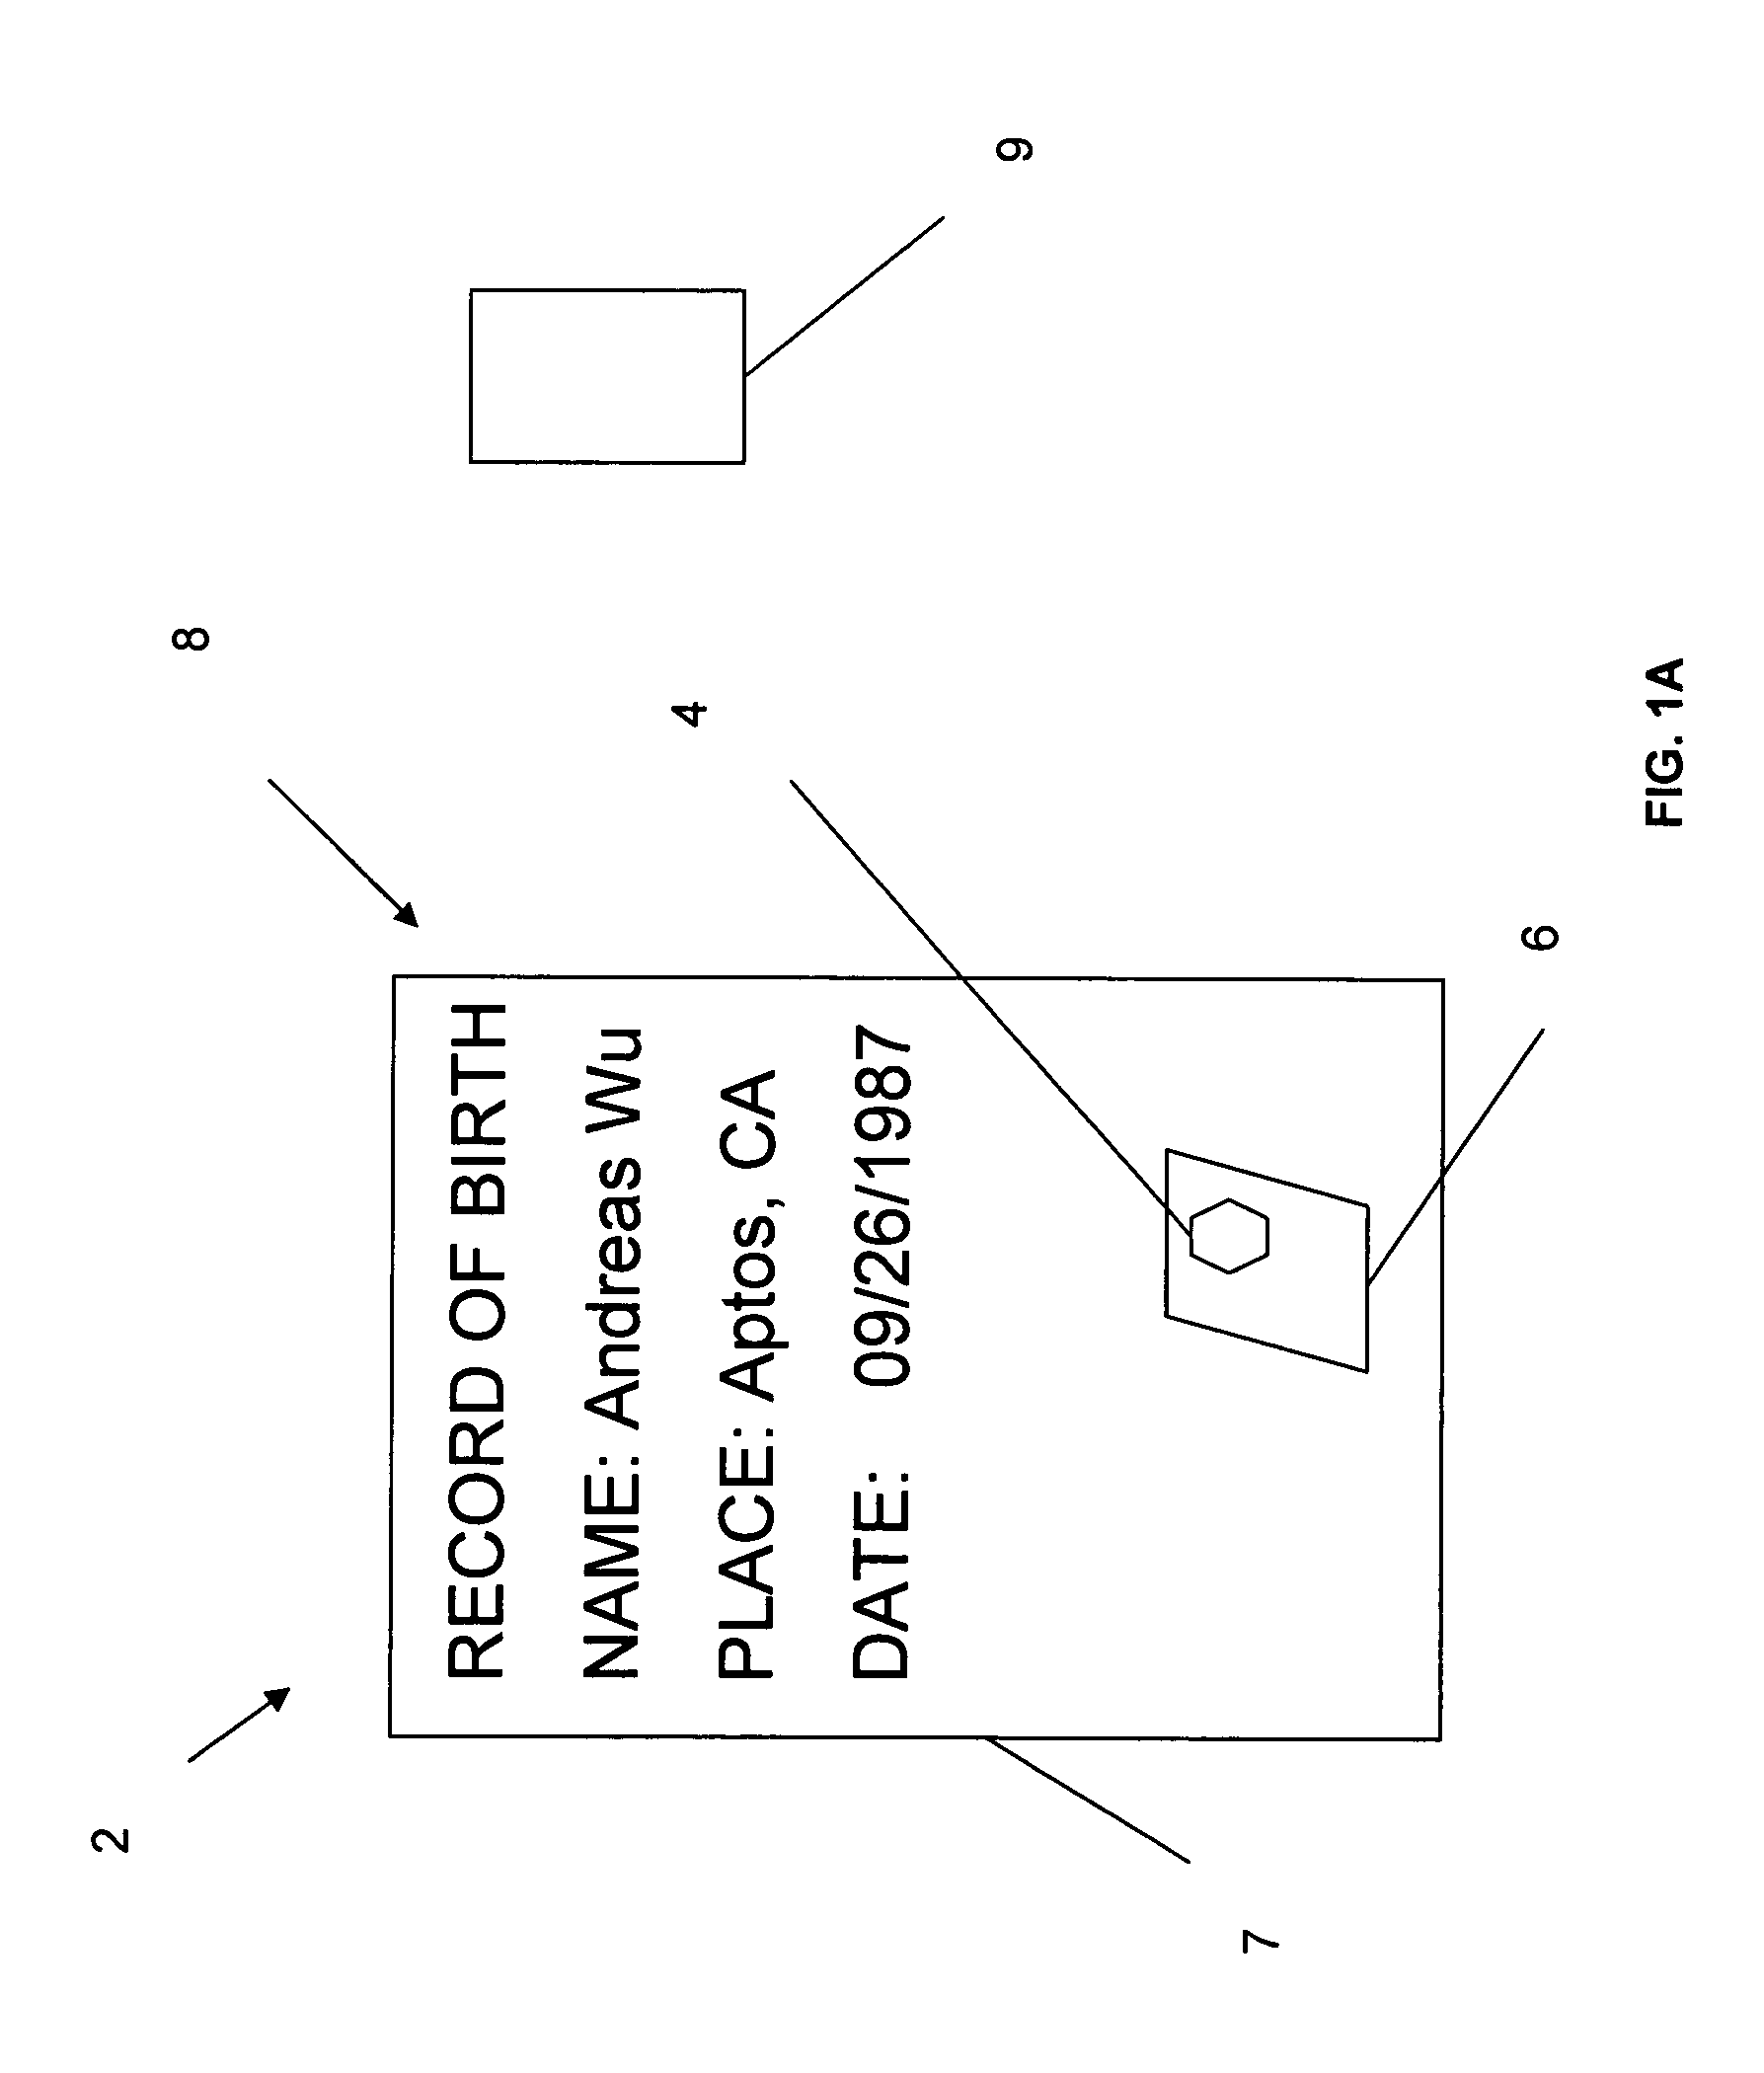 Birth and other legal documents having an RFID device and method of use for certification and authentication